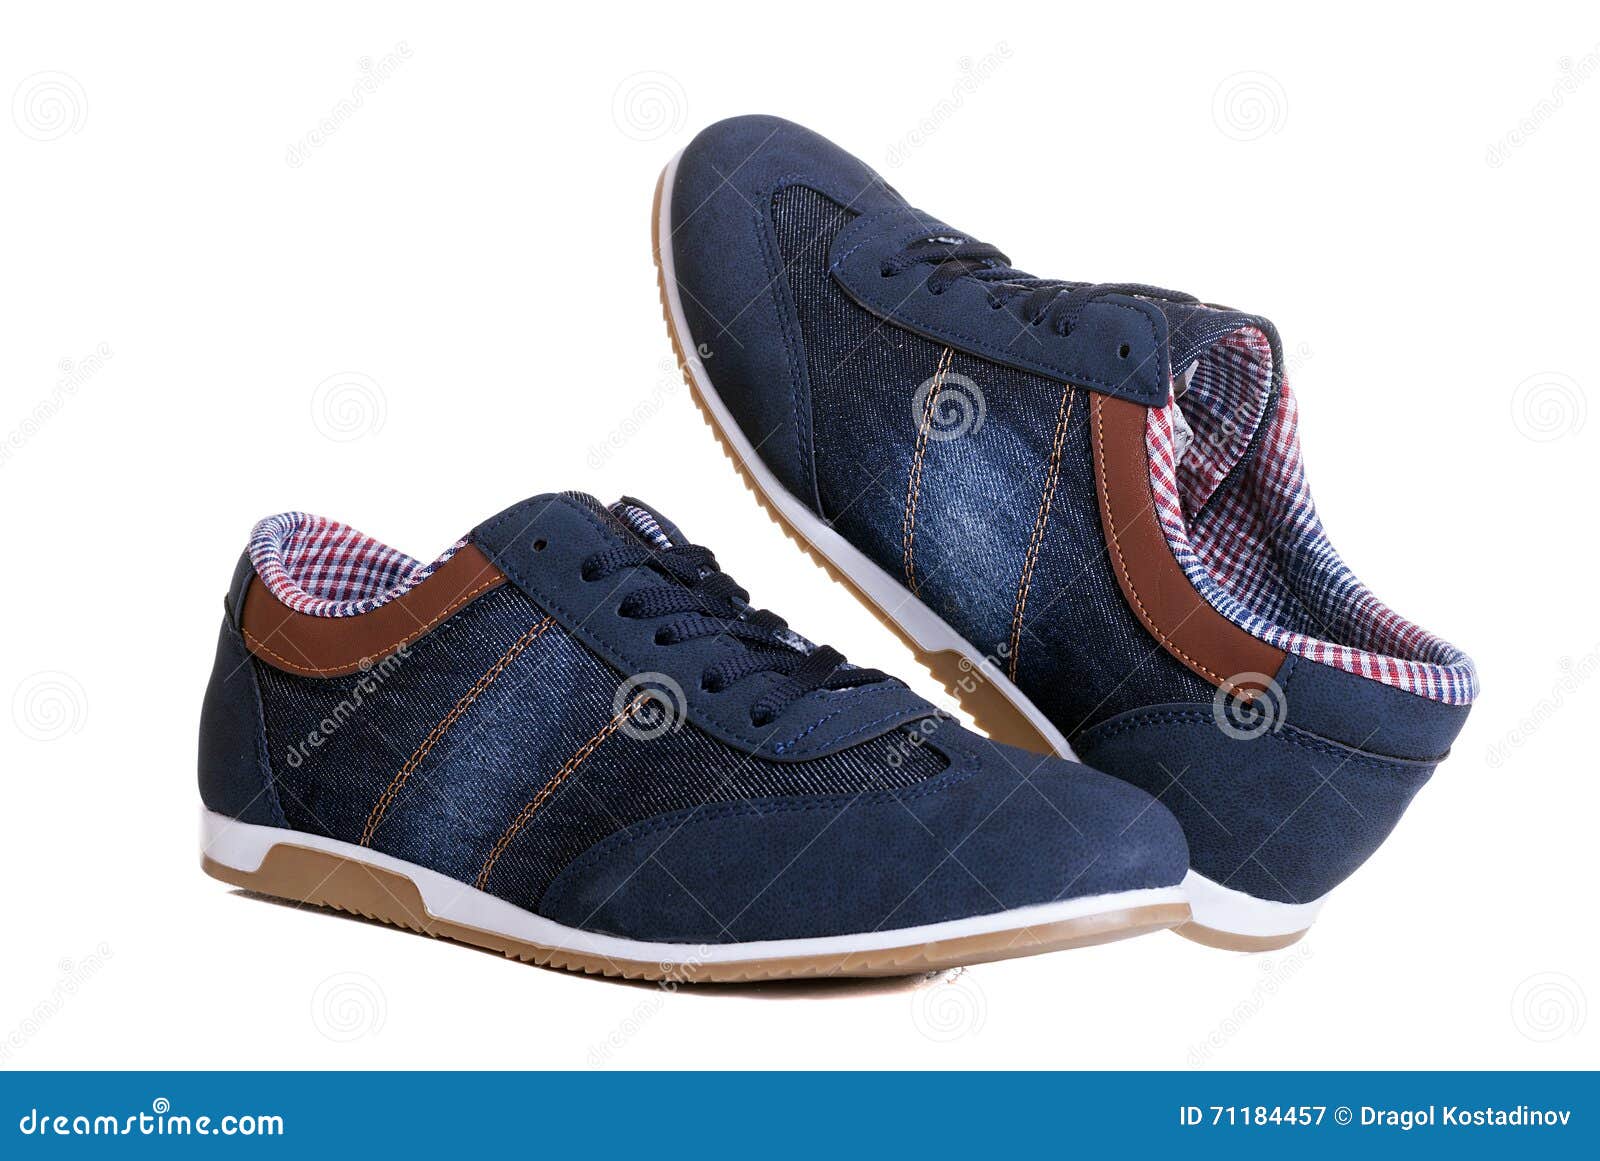 Shoes denim isolated stock image. Image of jeans, accessories - 71184457